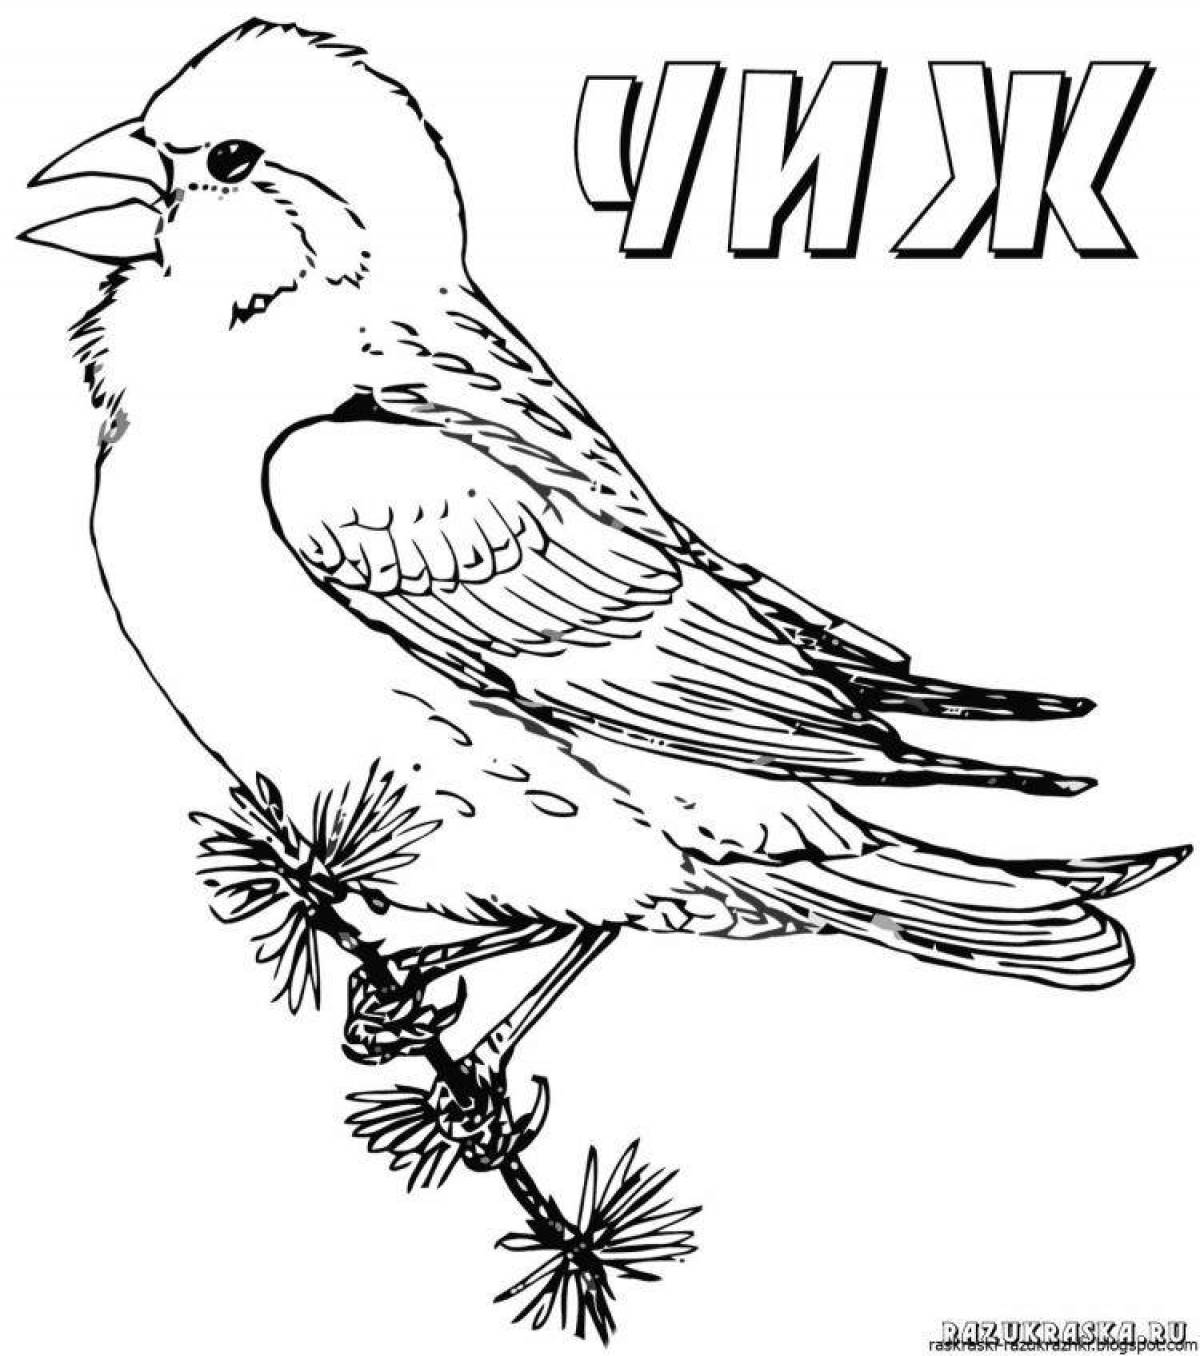 Coloring page hypnotic siskin